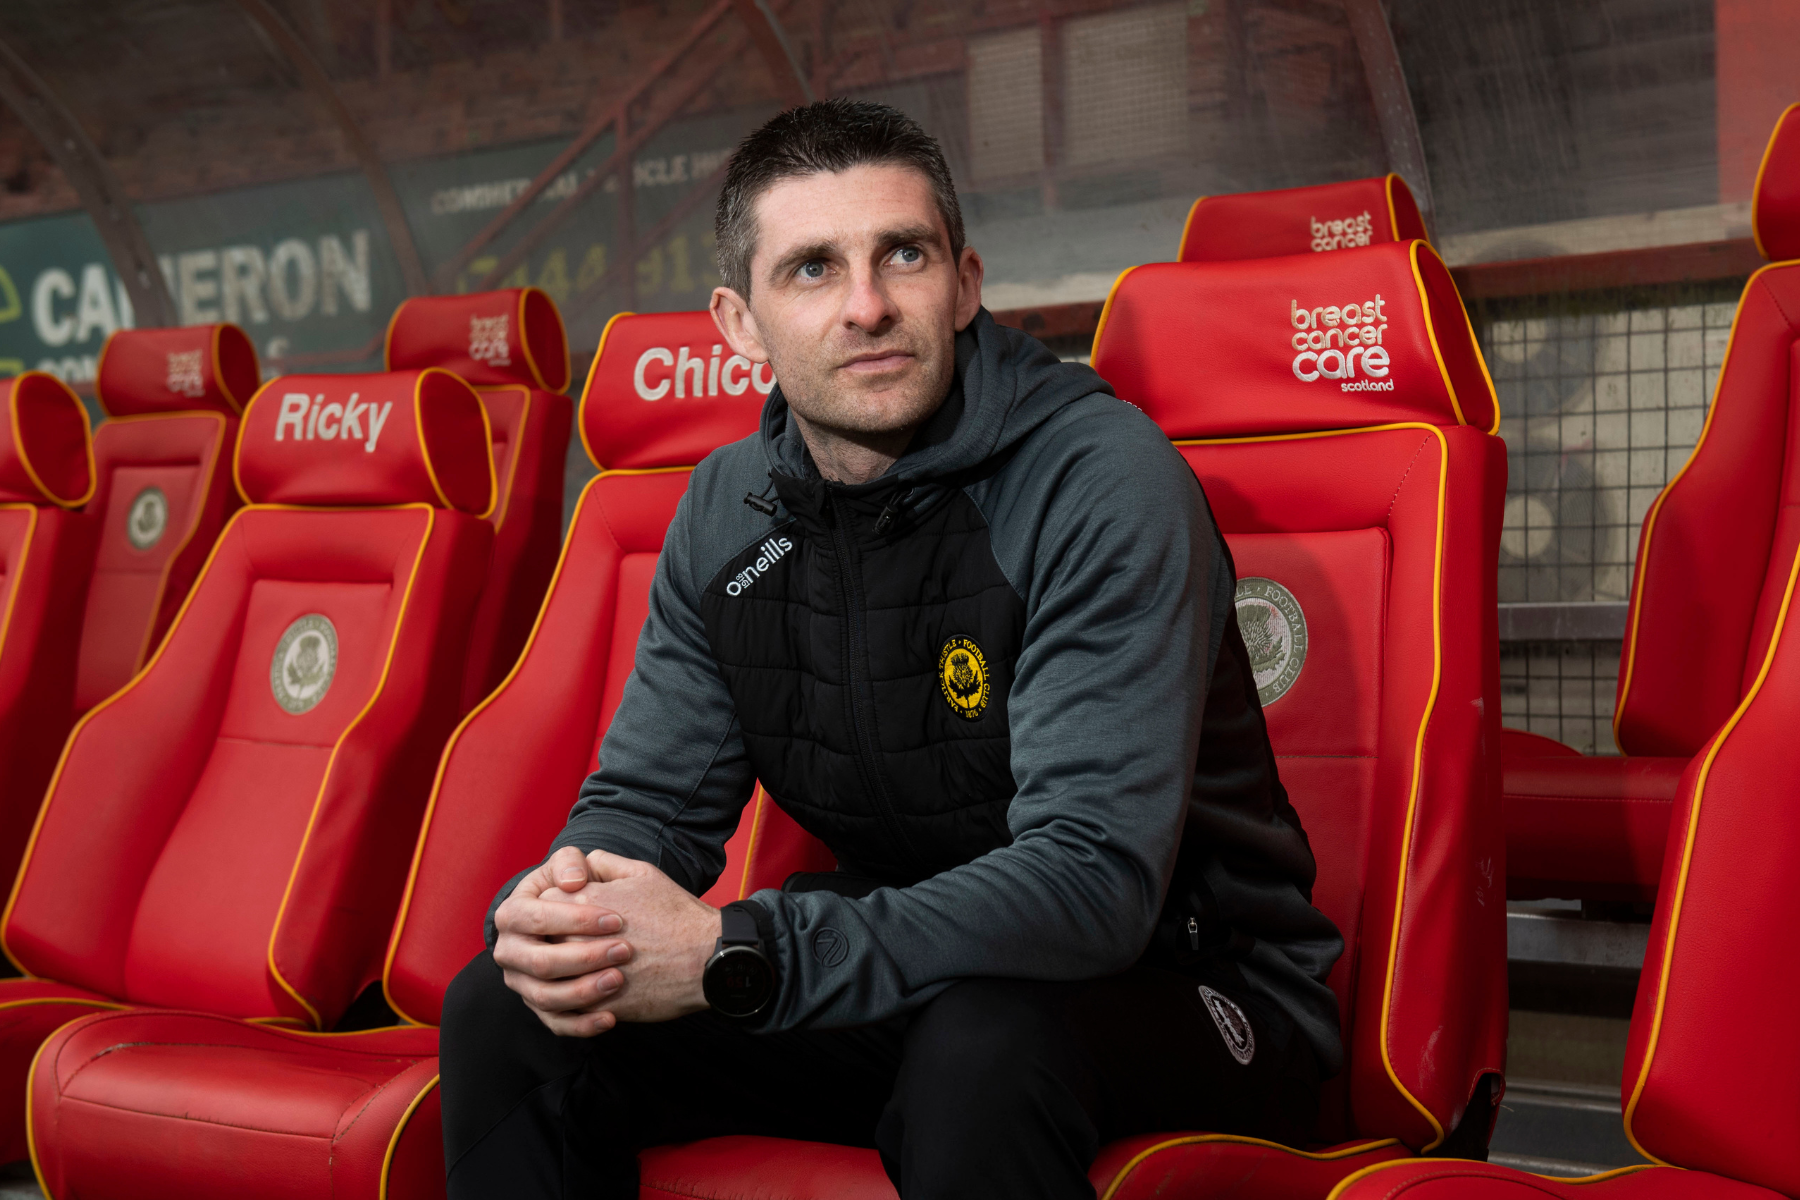 Partick Thistle manager reveals personal torment over ill father